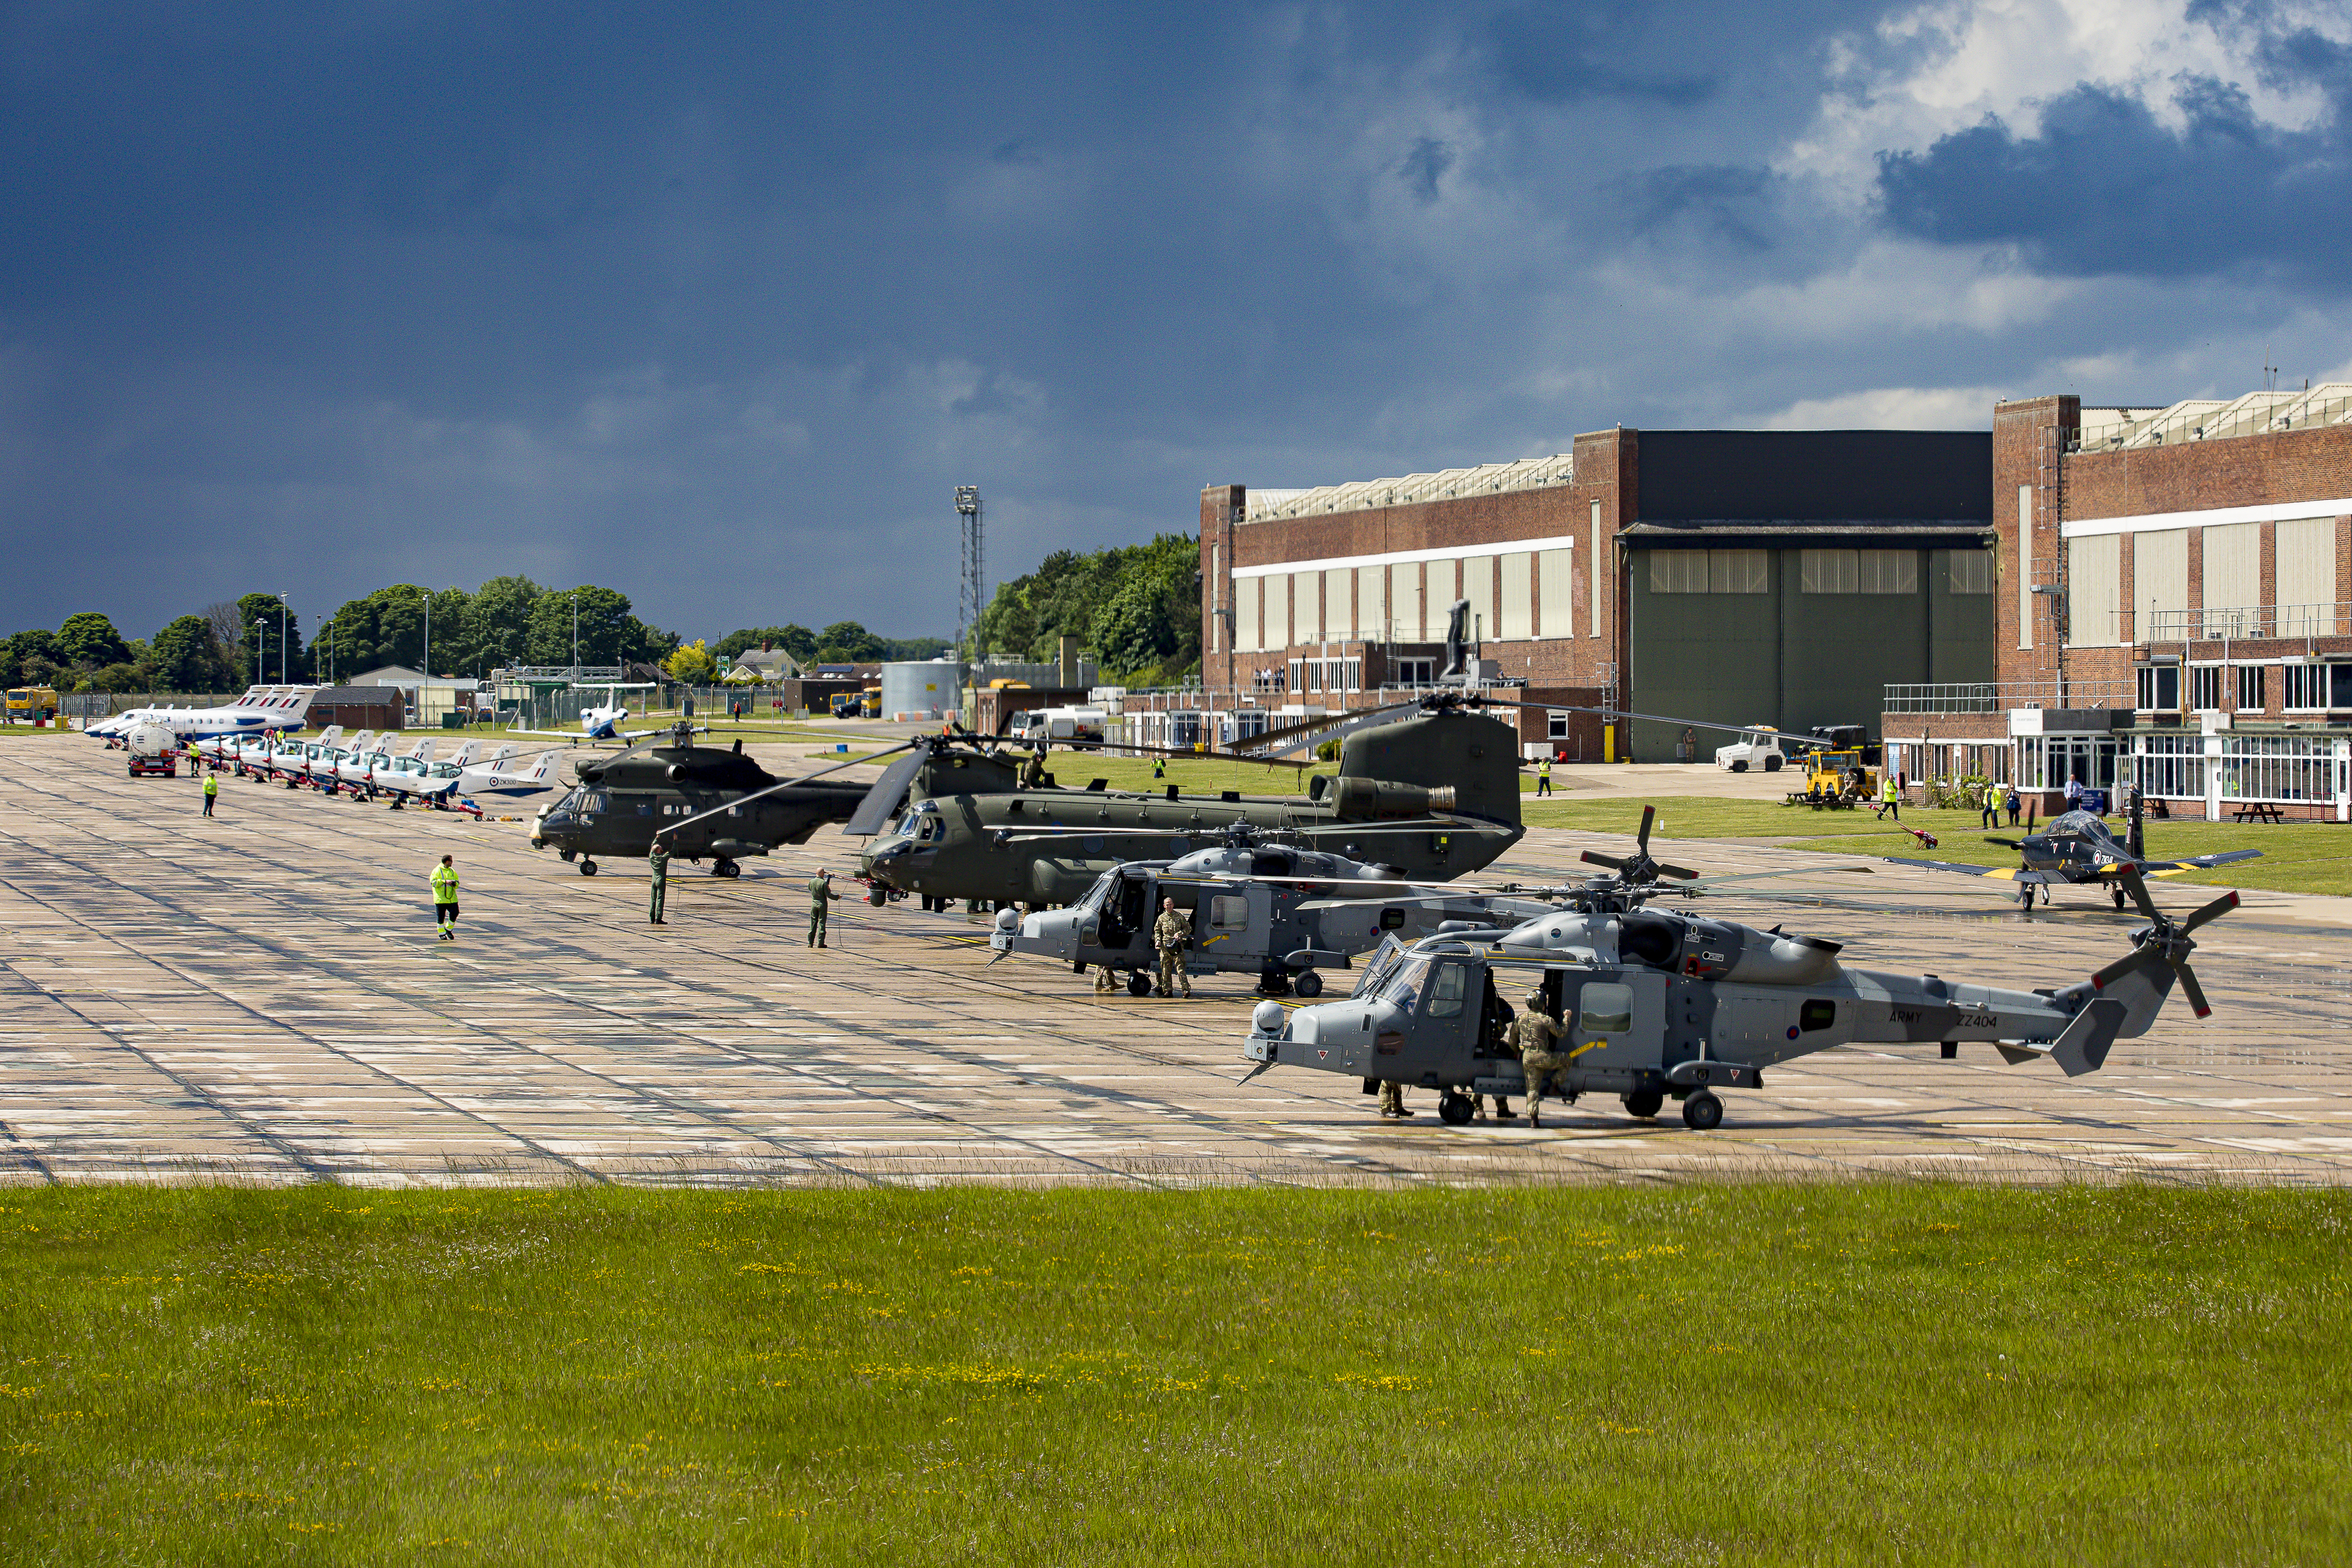 Helicopters on the airfield.